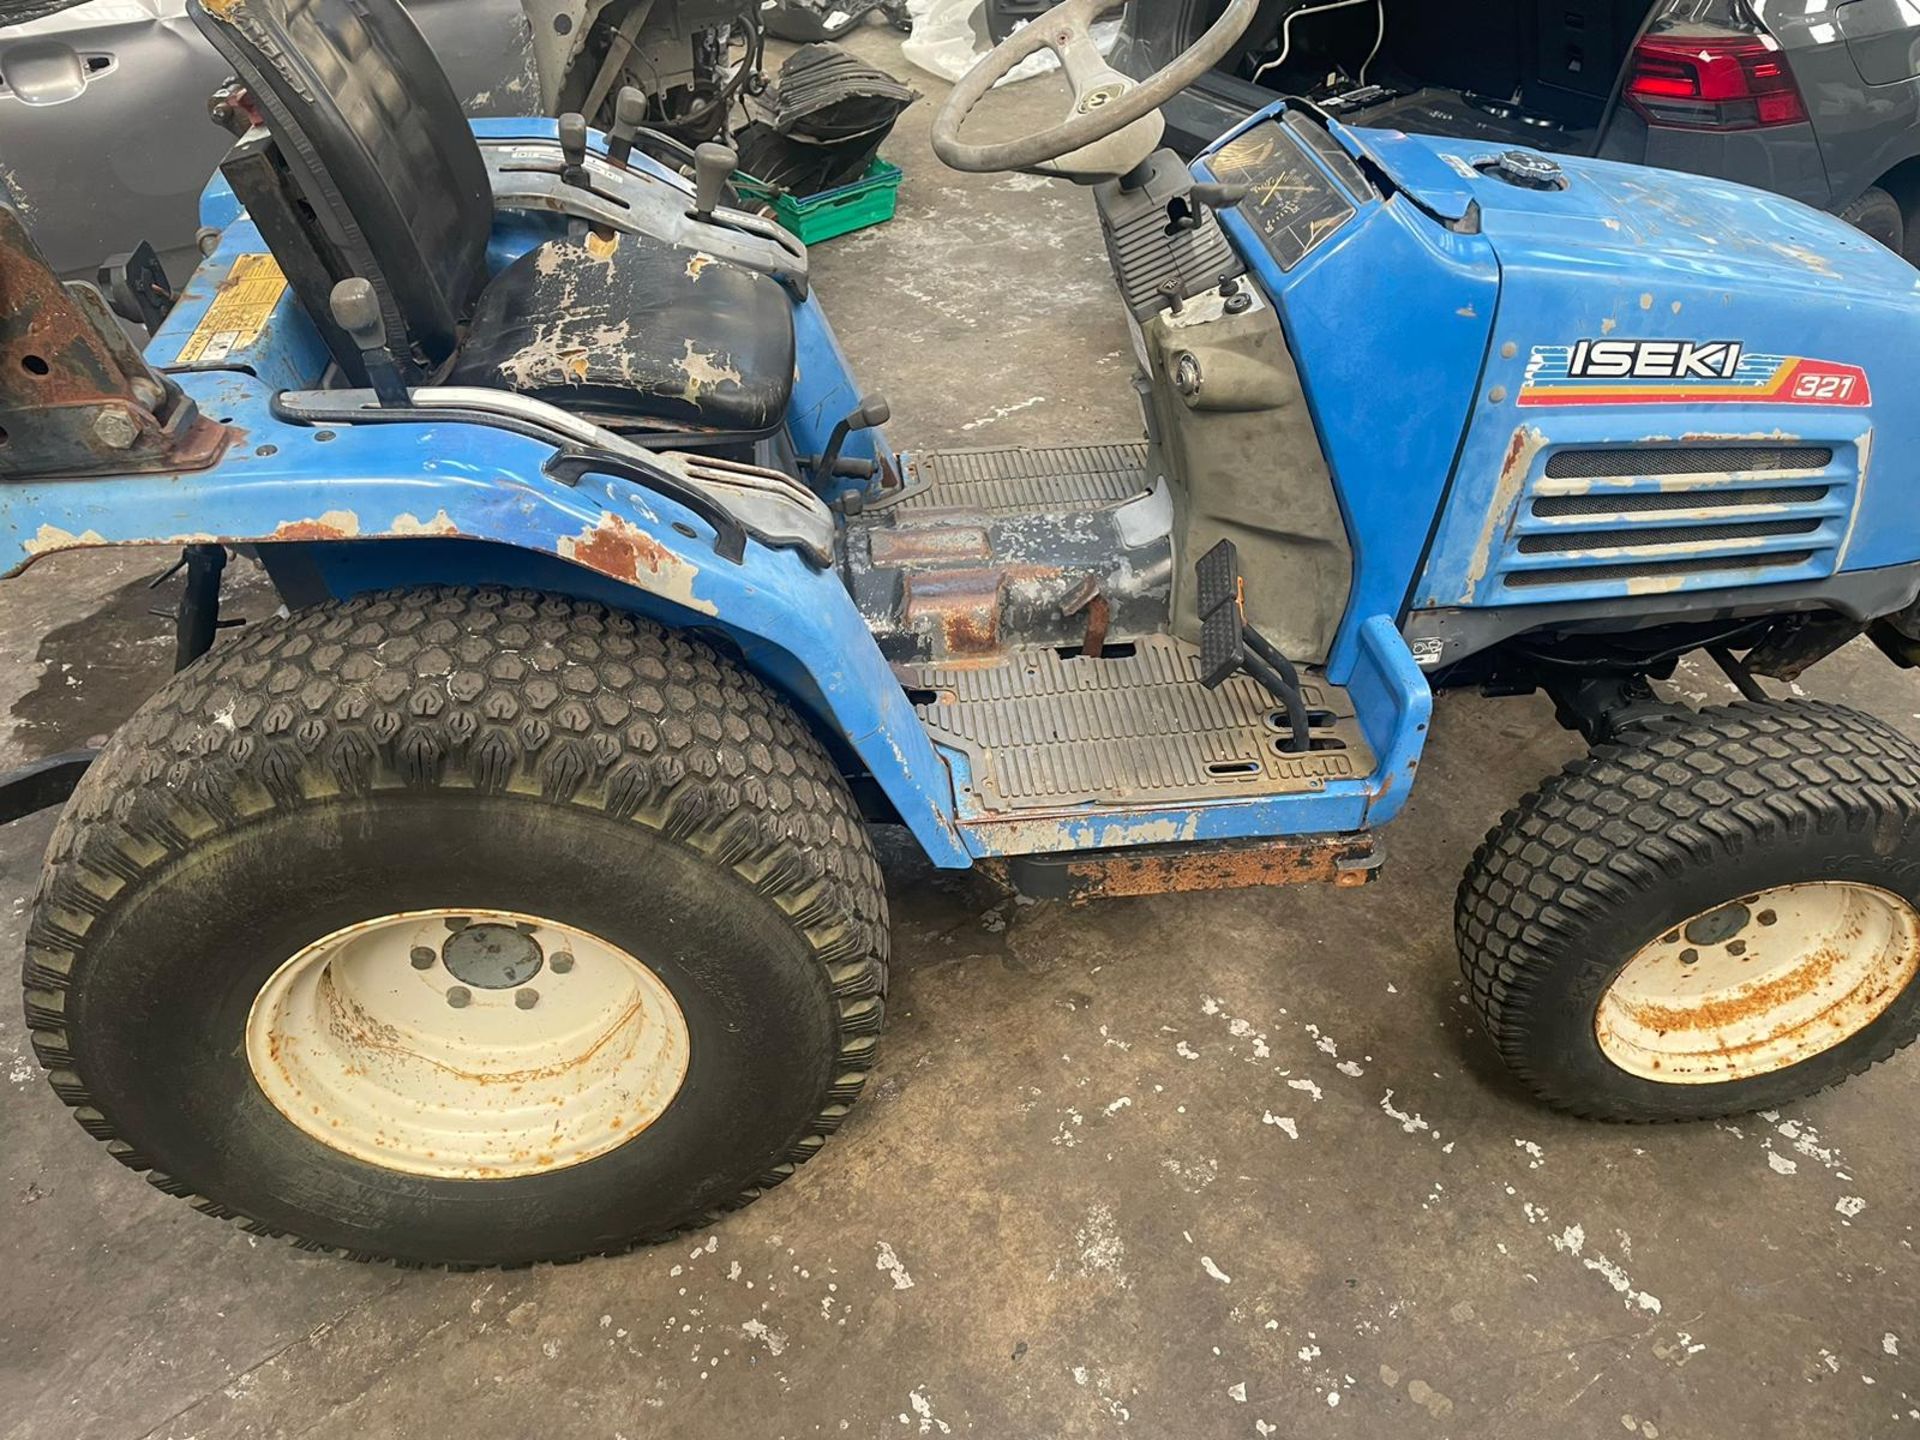 ISEKI 321 COMPACT TRACTOR BLUE, 3 CYLINDER DIESEL, NEW OIL AND FILTERS, NEW BATTERY *NO VAT* - Image 2 of 14